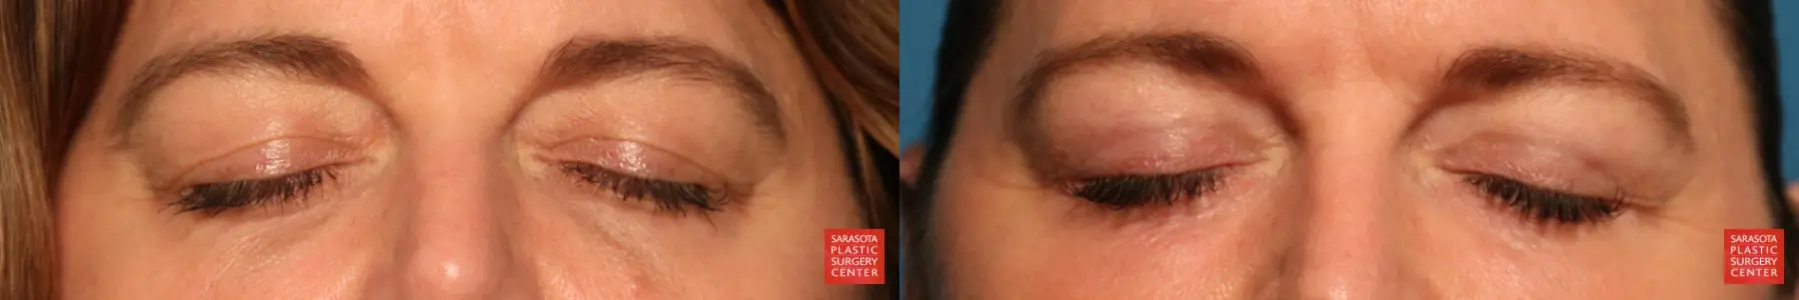 Eyelid Lift: Patient 6 - Before and After 2